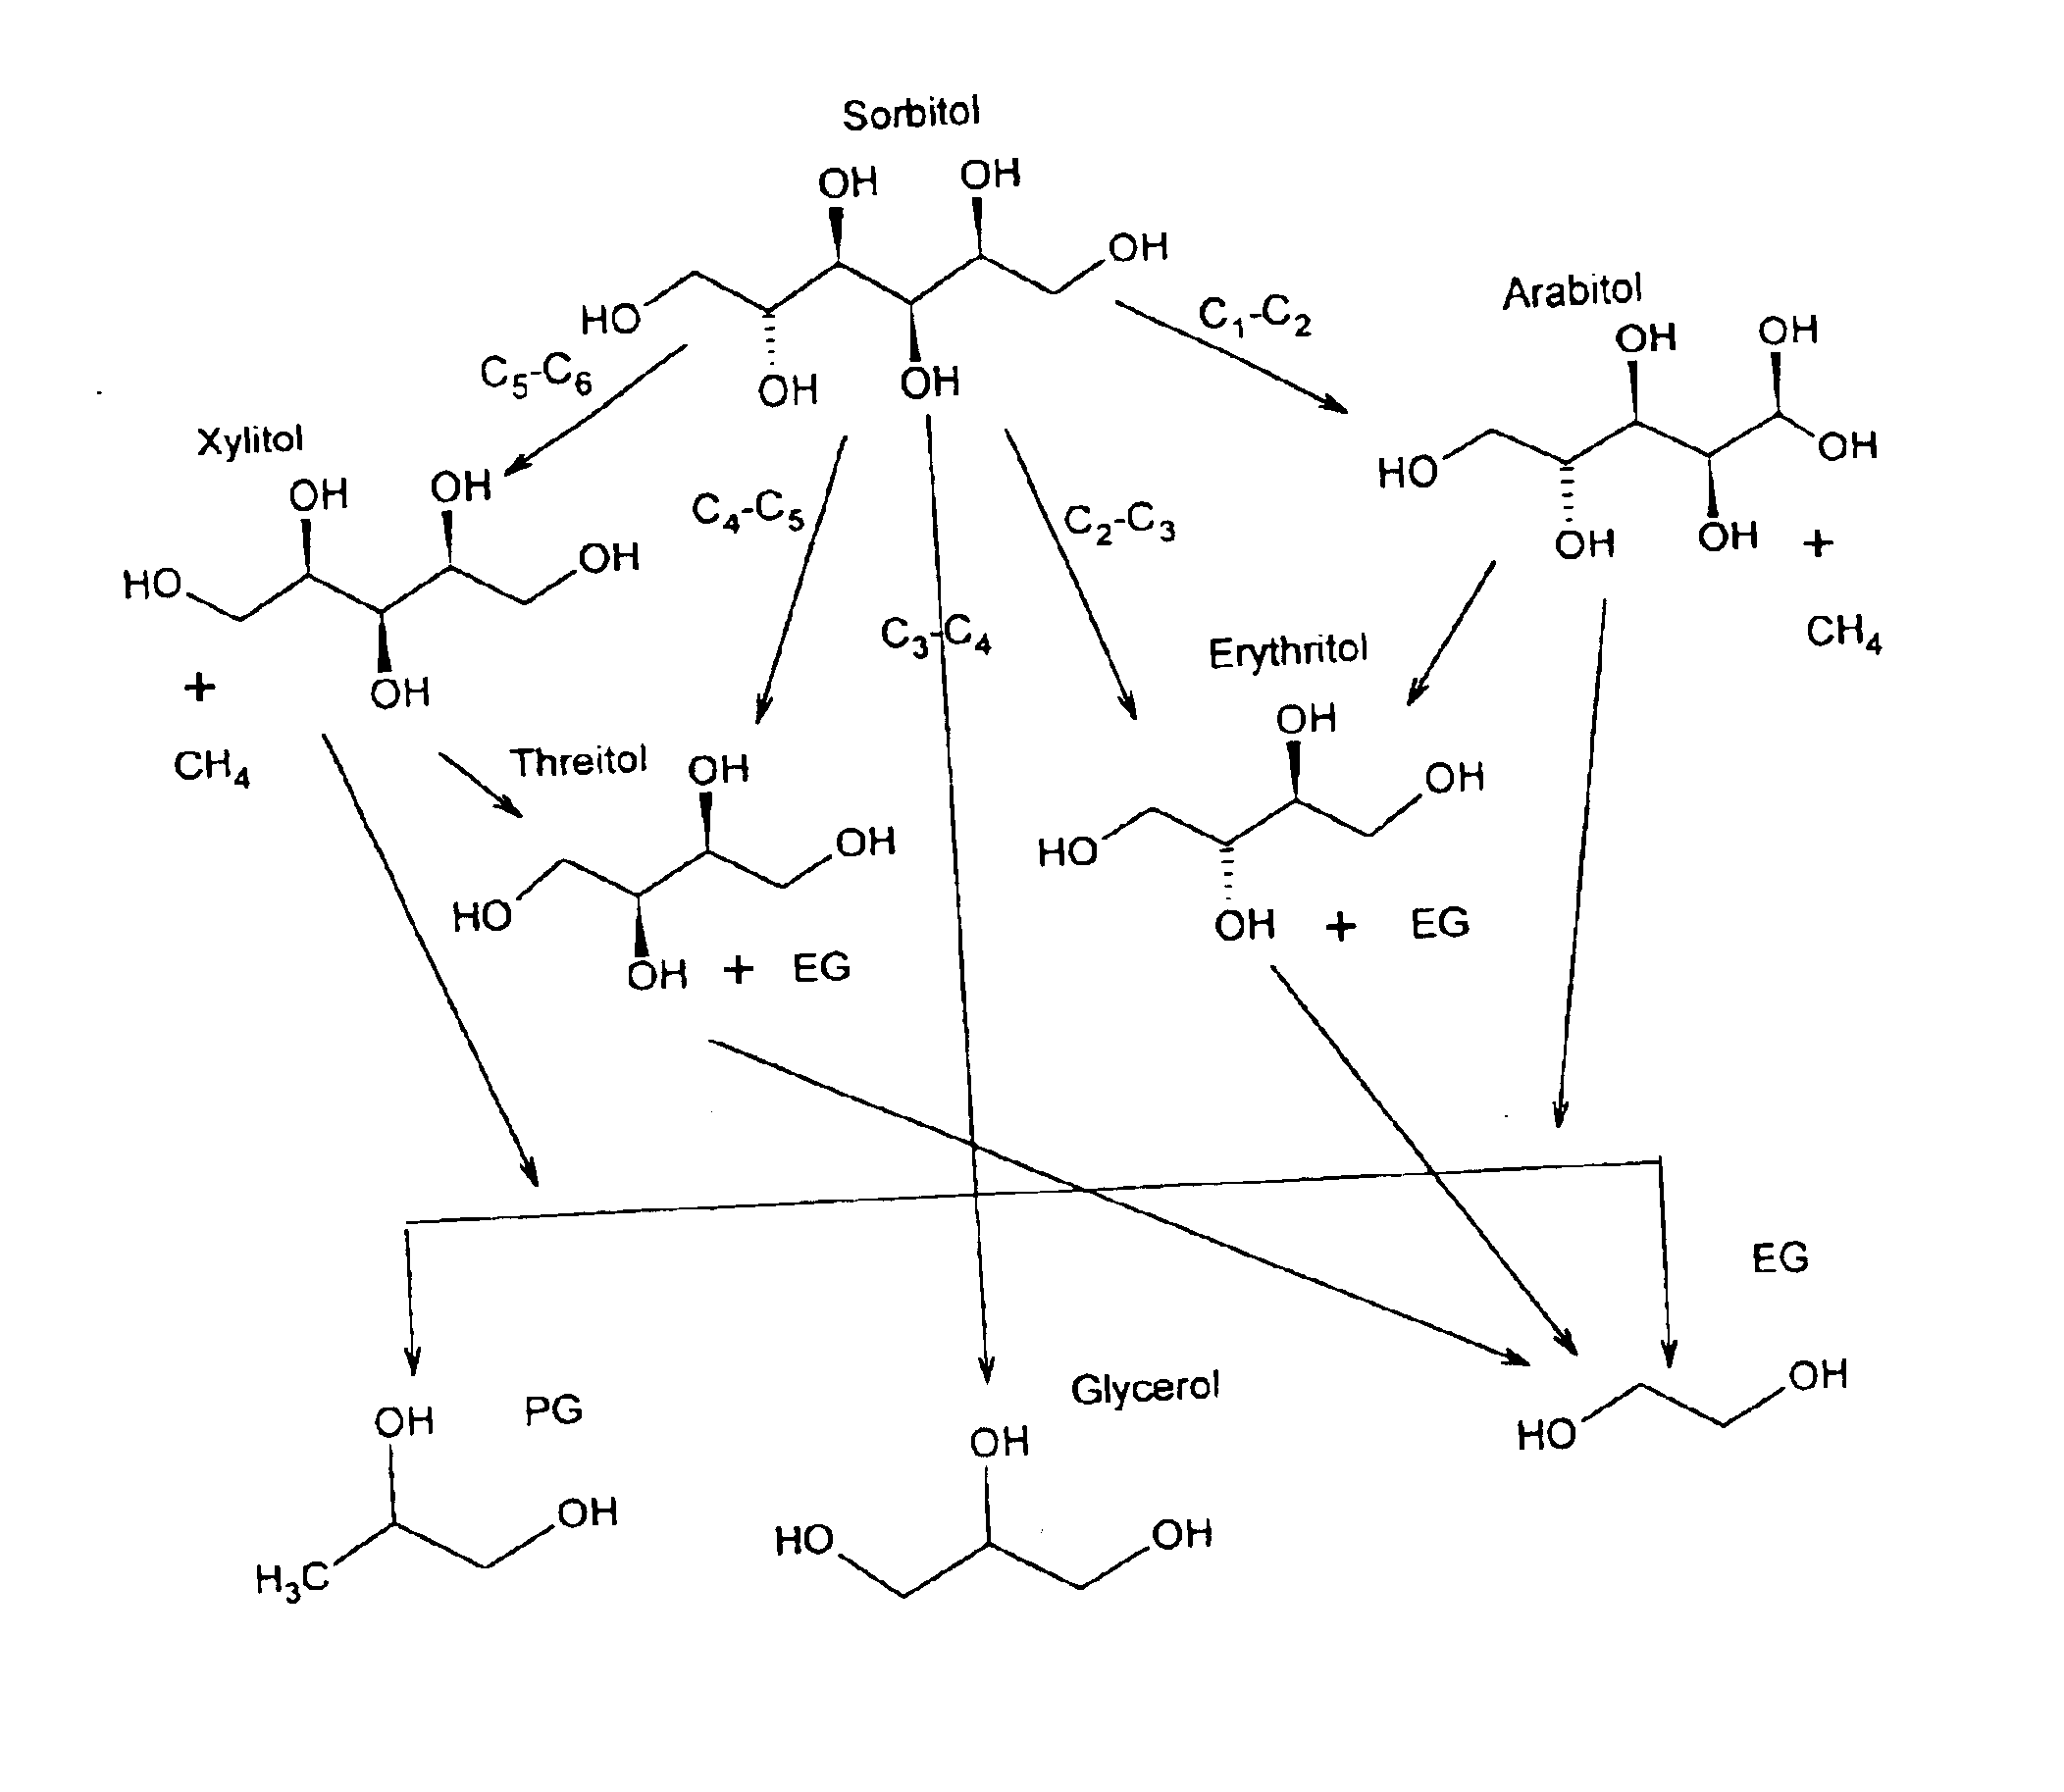 Hydrogenolysis of 6-carbon sugars and other organic compounds